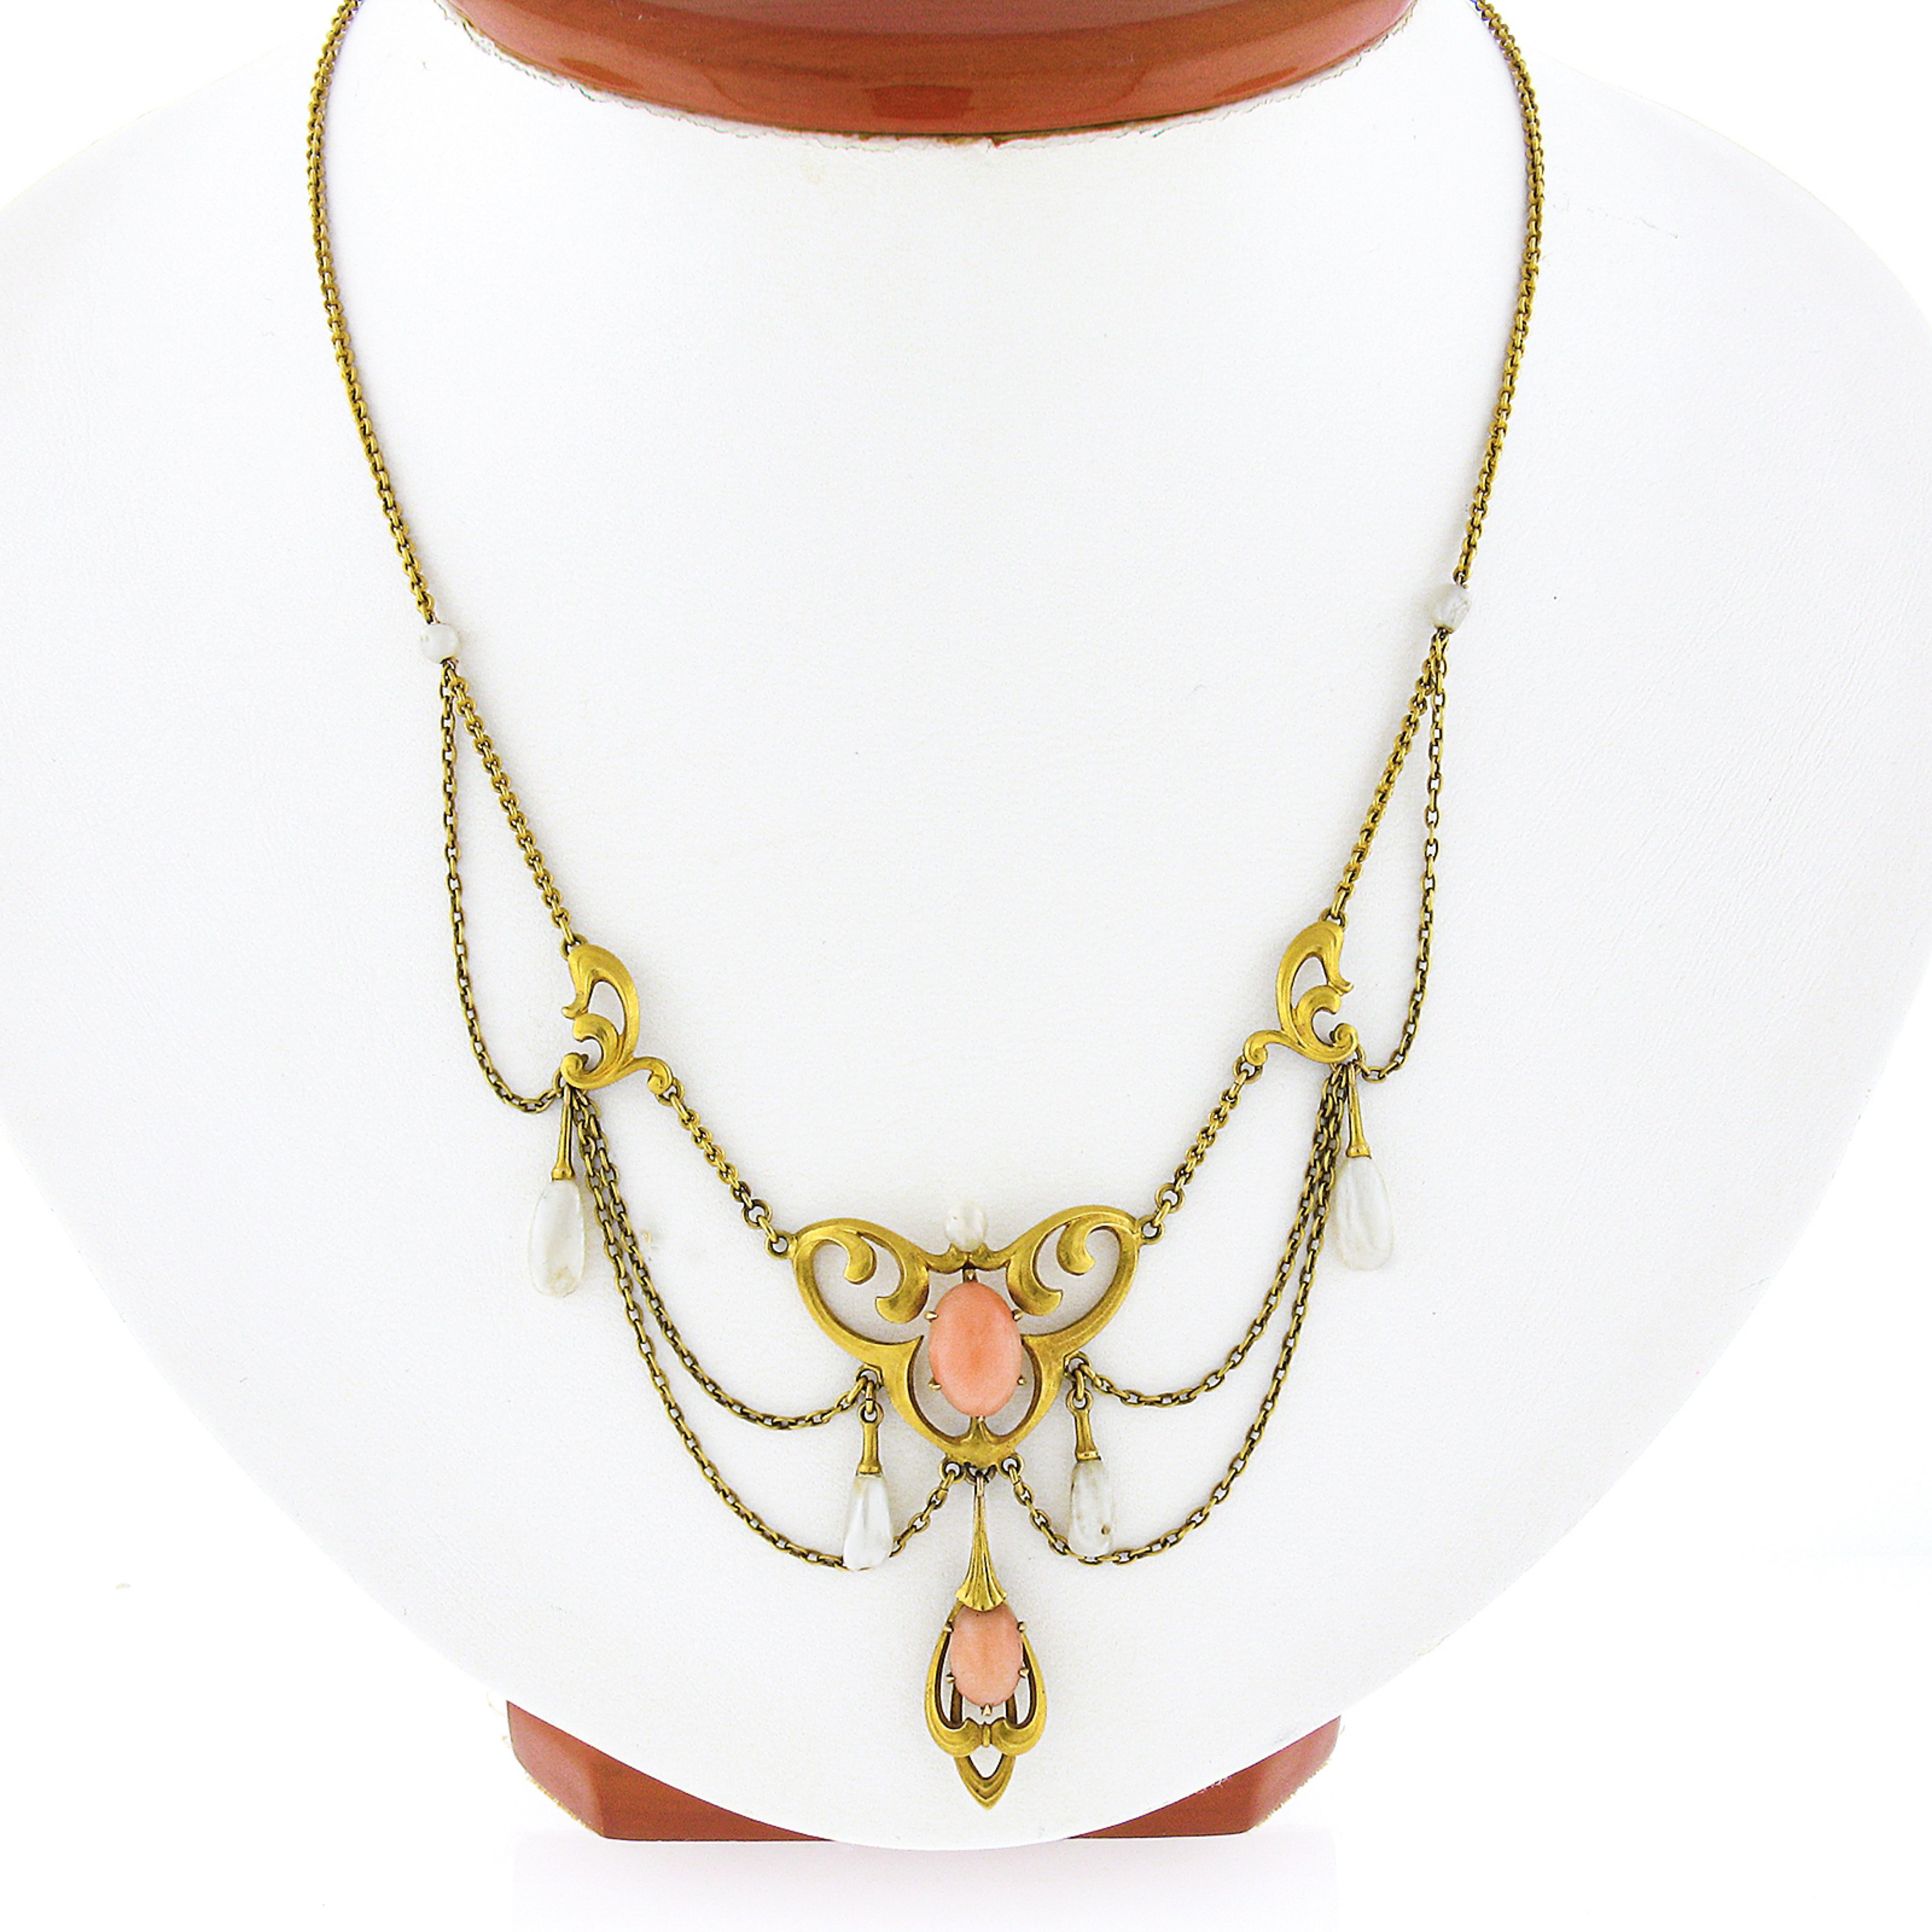 Here we have an absolutely gorgeous antique swag necklace designed by Krementz that was crafted in solid 14k yellow gold during the art nouveau period. This necklace features an elegant open work design at the center of the cable chain in which is